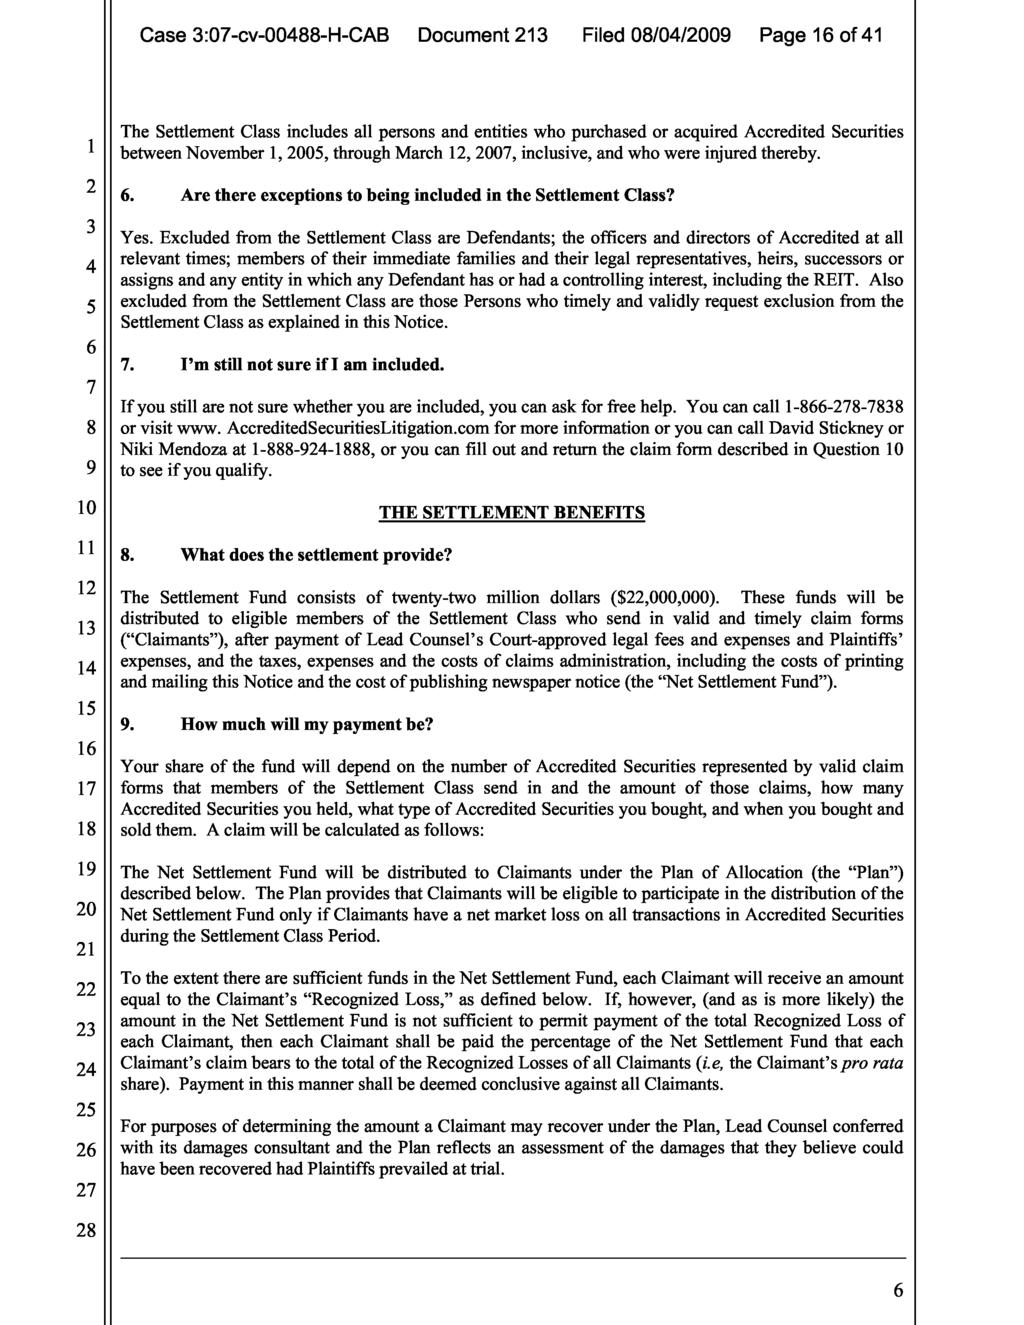 Case 3:07-cv-0088-H-CAB Document 213 Filed 08/0/2009 Page 16 of 1 The Settlement Class includes all persons and entities who purchased or acquired Accredited Securities 1 between November 1, 2005,